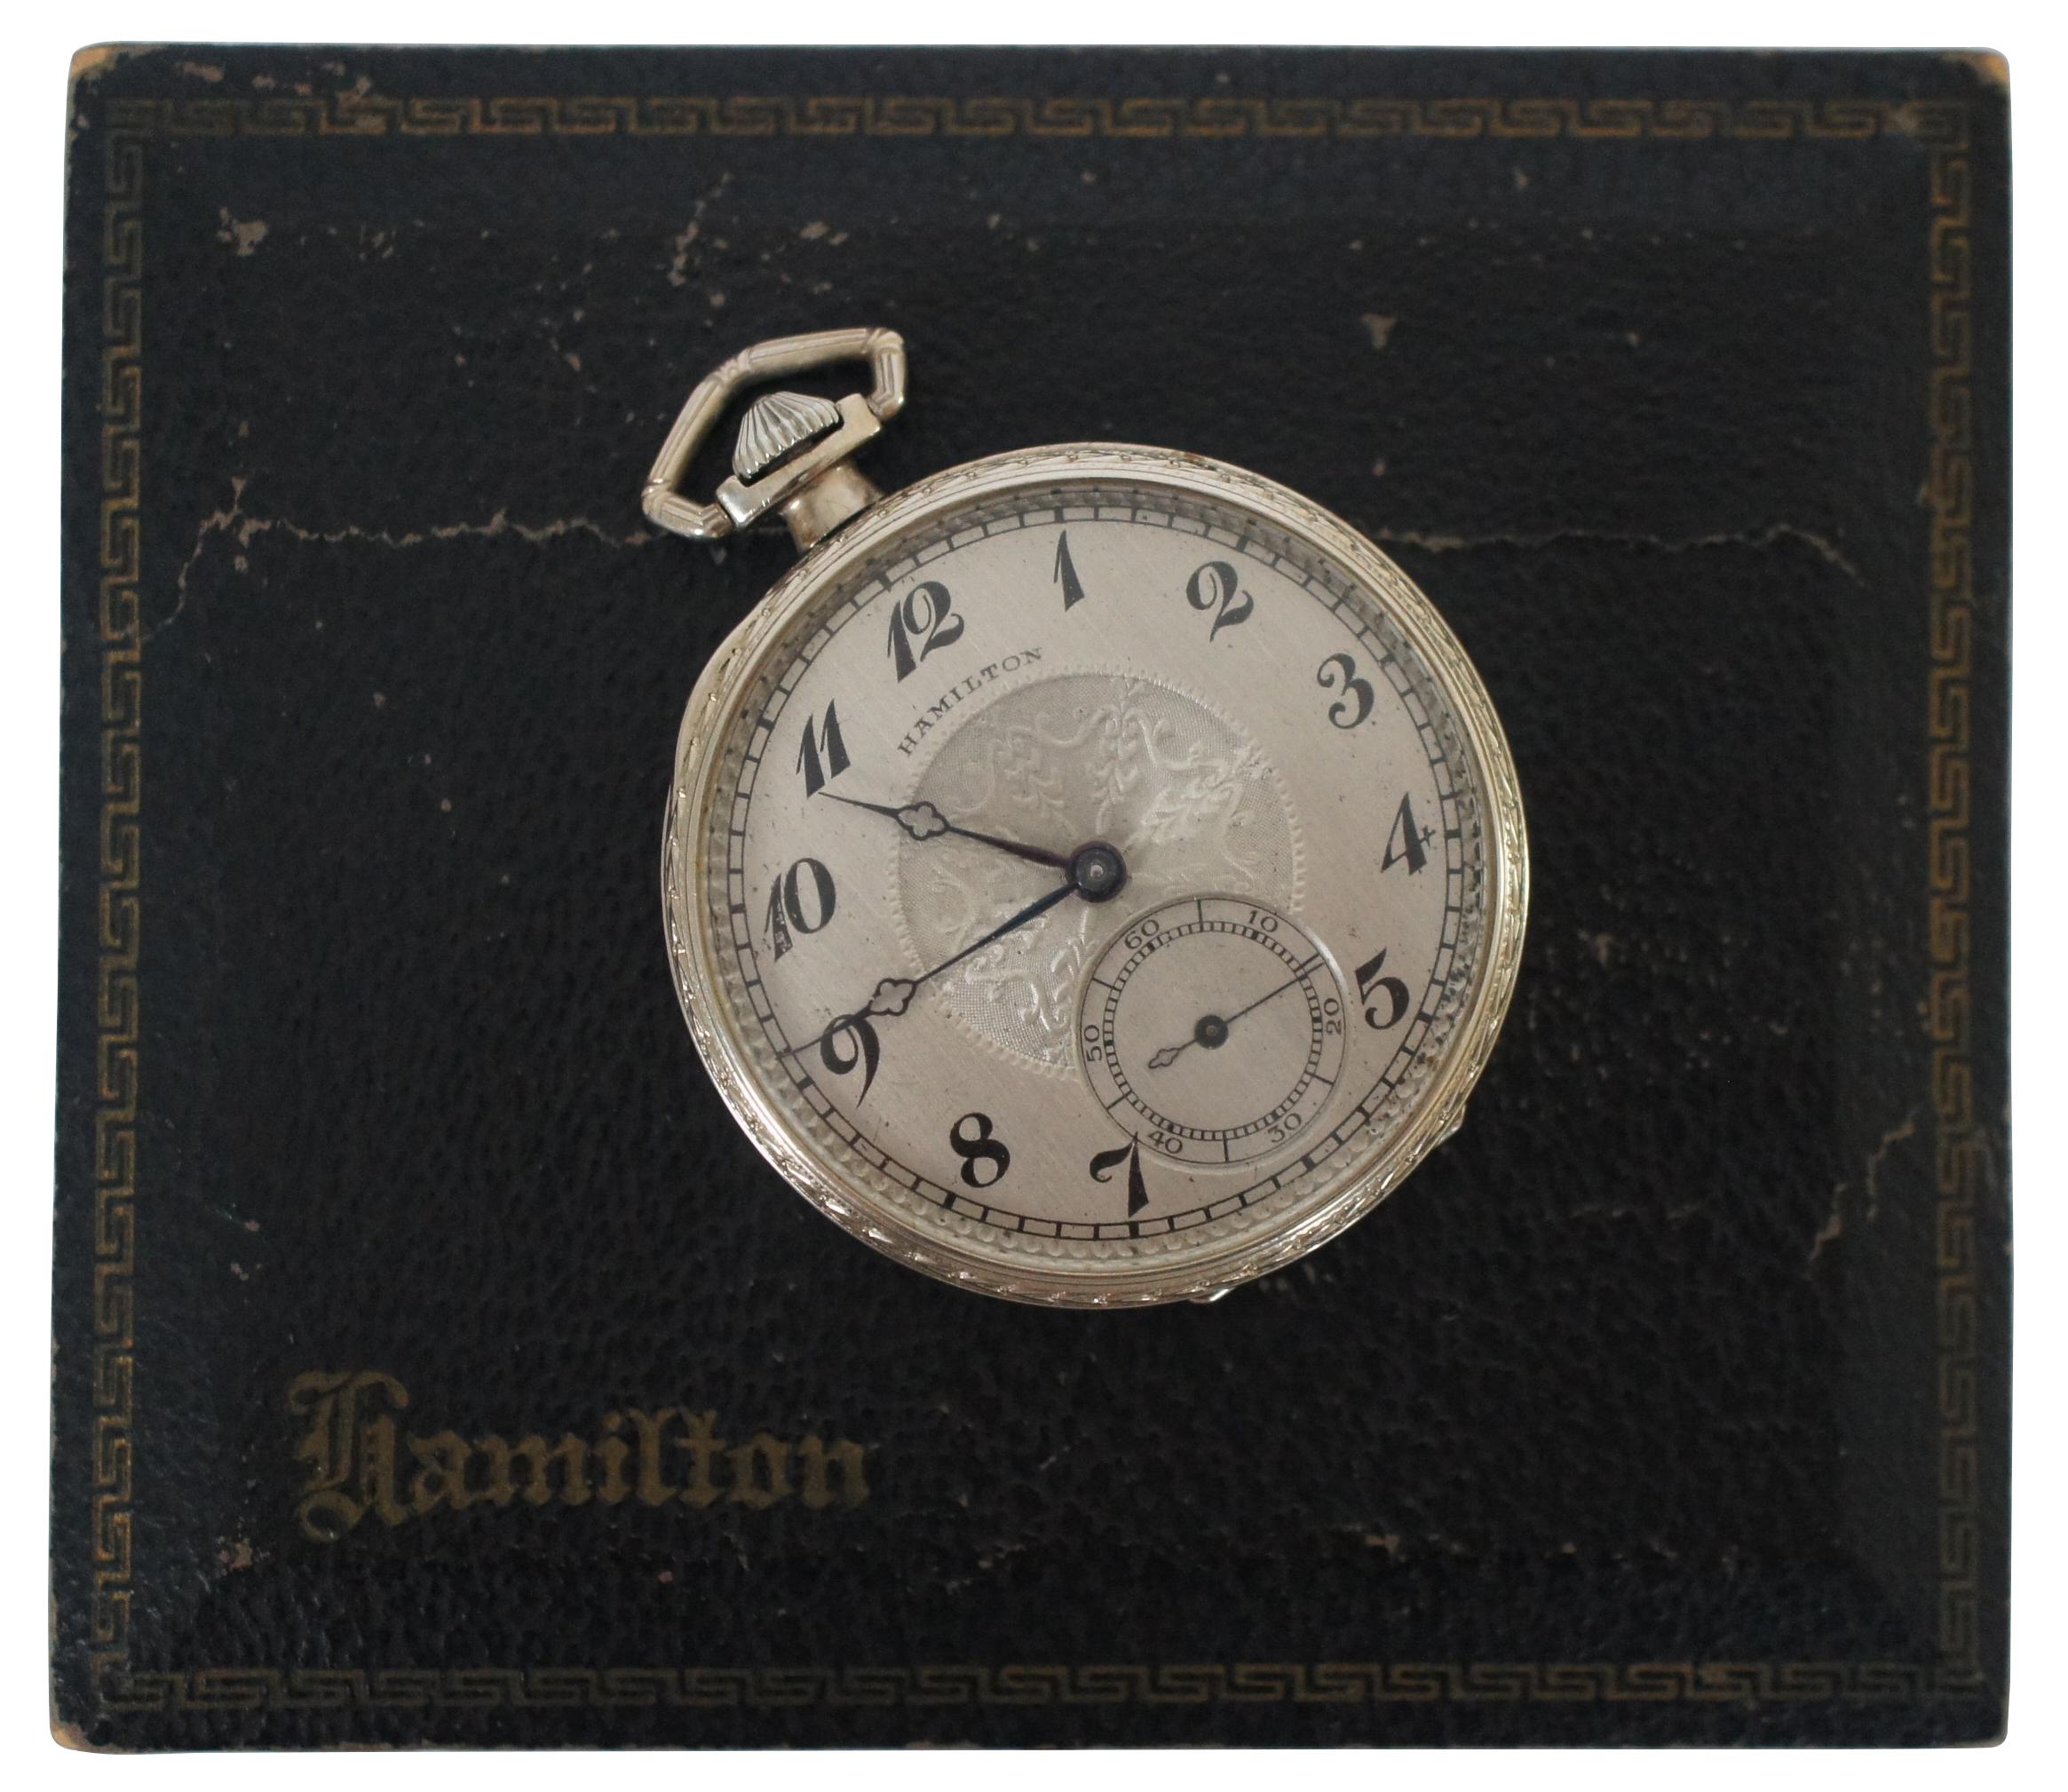 Antique 1920’s 14K white gold filled mechanical railroad pocket watch by Hamilton Watch Company of Lancaster, PA, featuring an art deco foliate design around the sides and an embossed medallion on the face; case marked with Fahys caduceus logo and